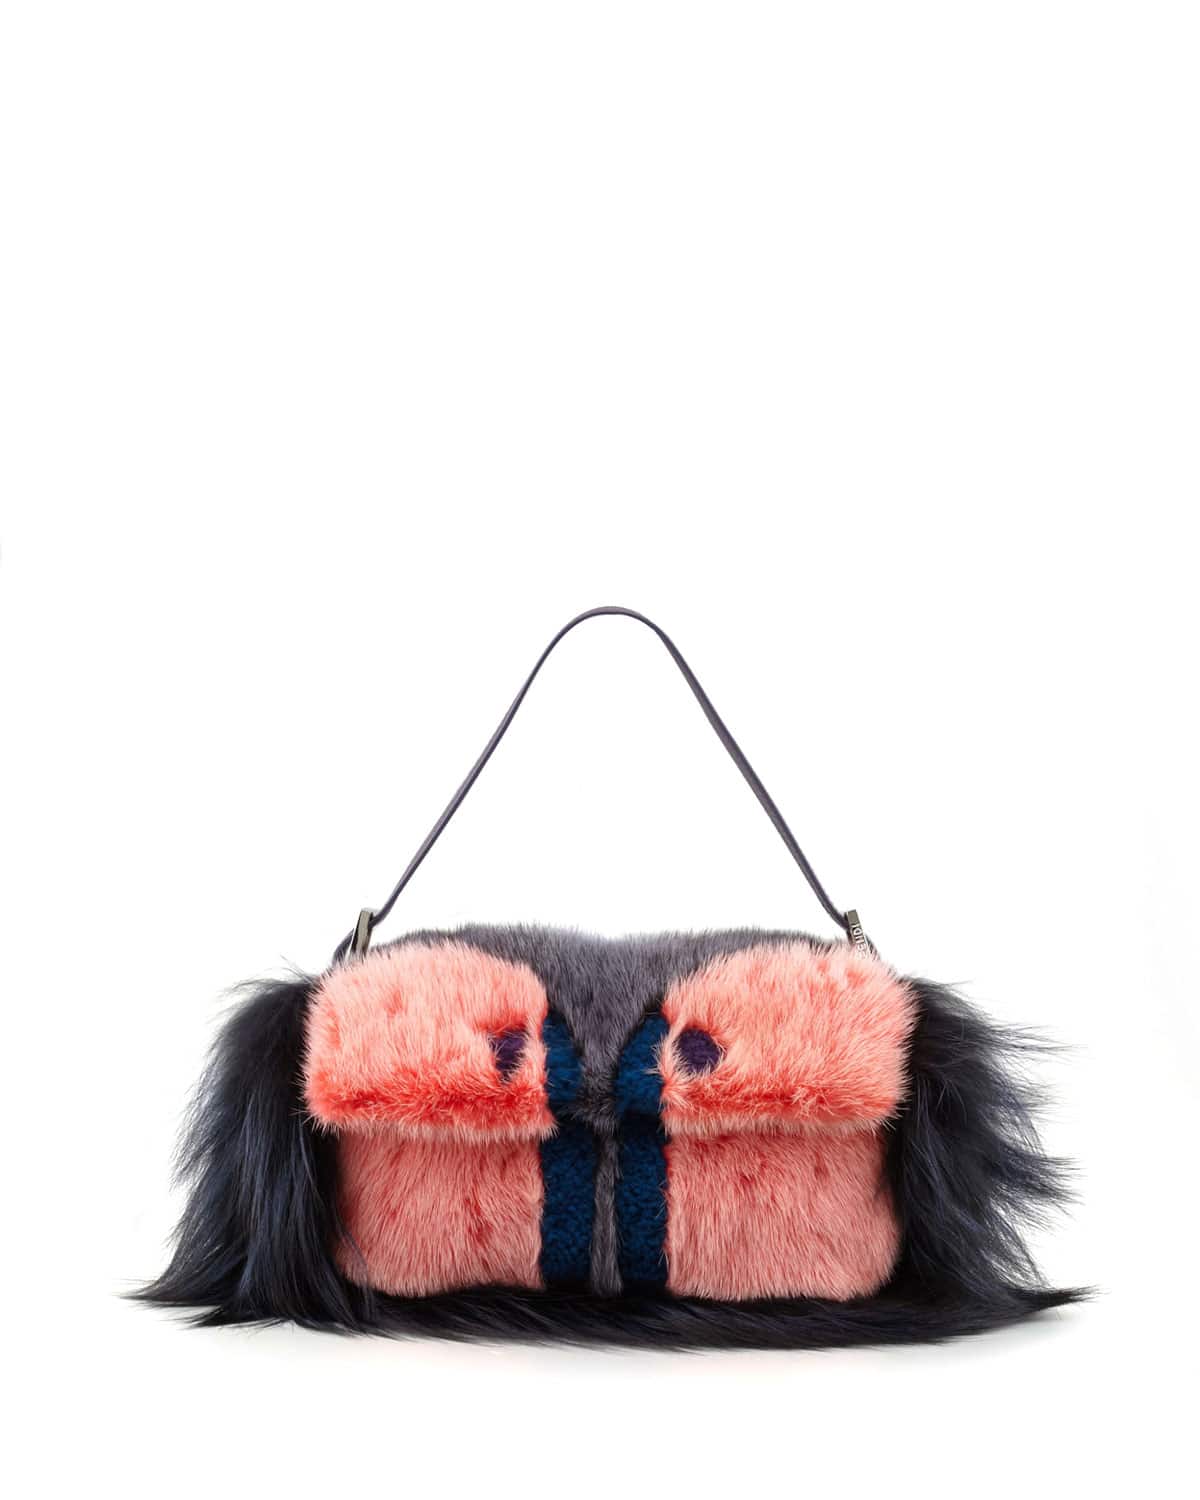 Fendi Monster Bug Baguettes for Pre-fall 2014 Collection - Spotted Fashion